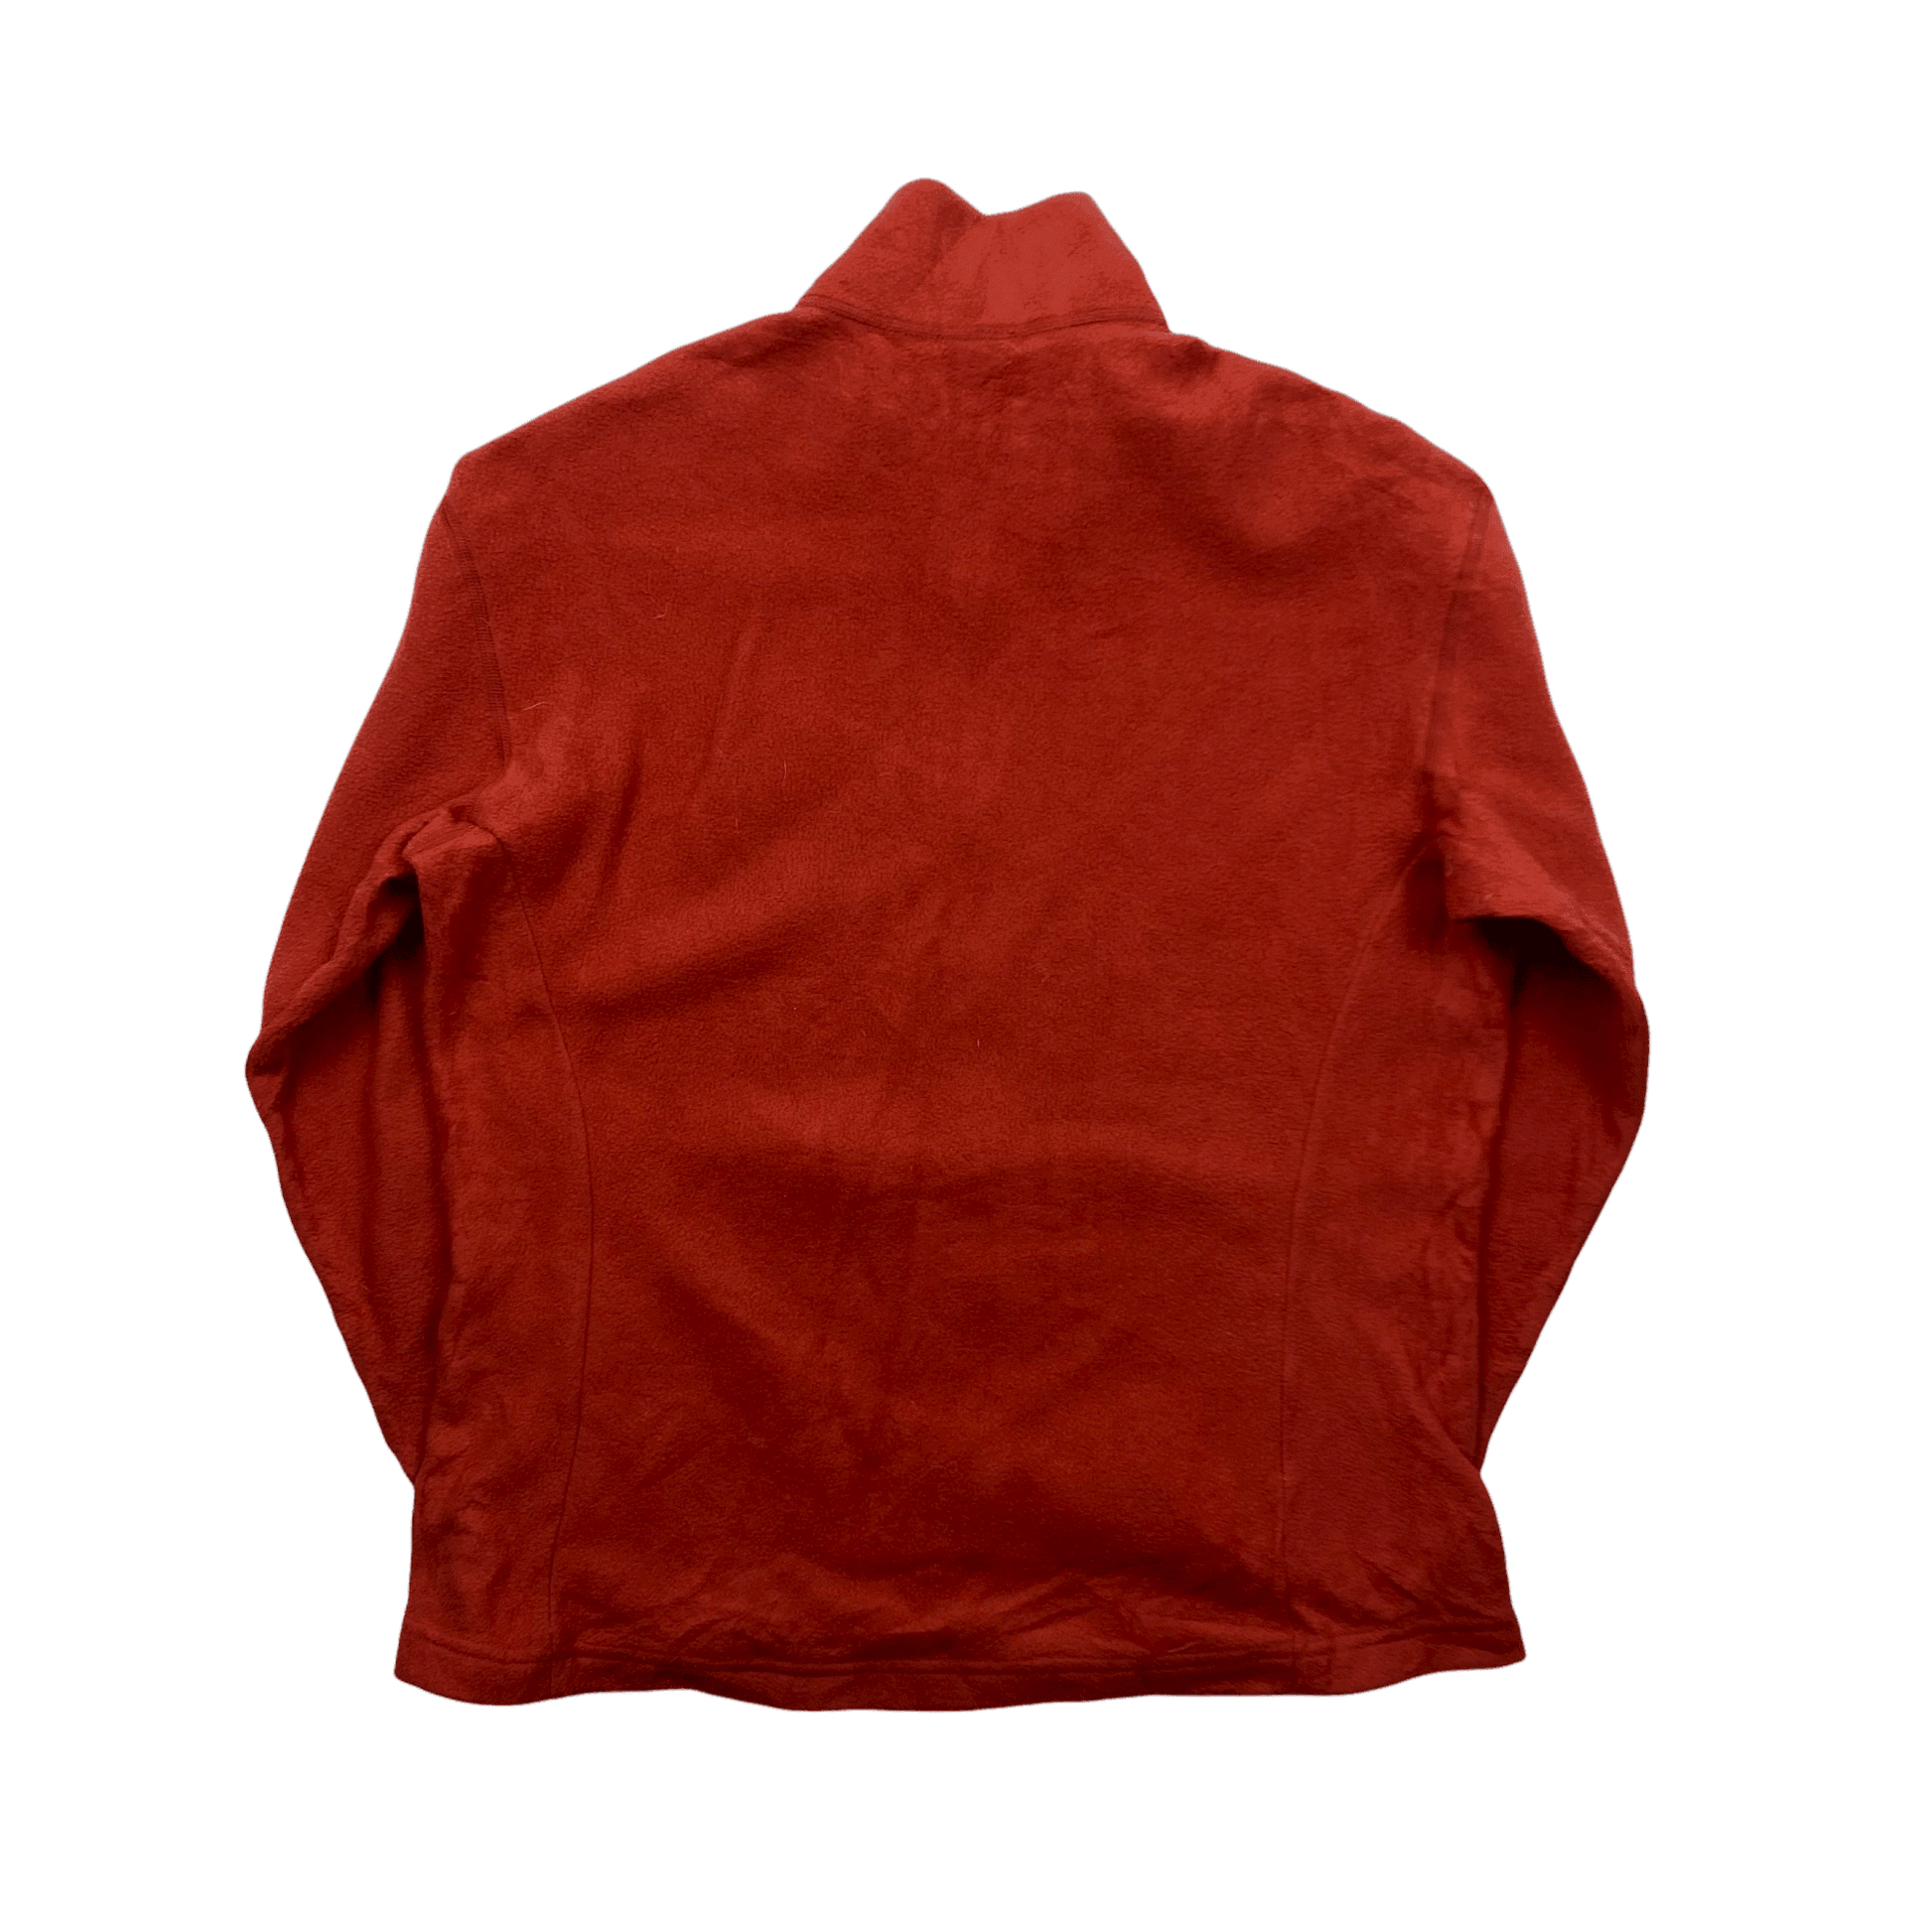 Vintage 90s Women's Red Patagonia Synchilla Full Zip Fleece - Extra Large - The Streetwear Studio